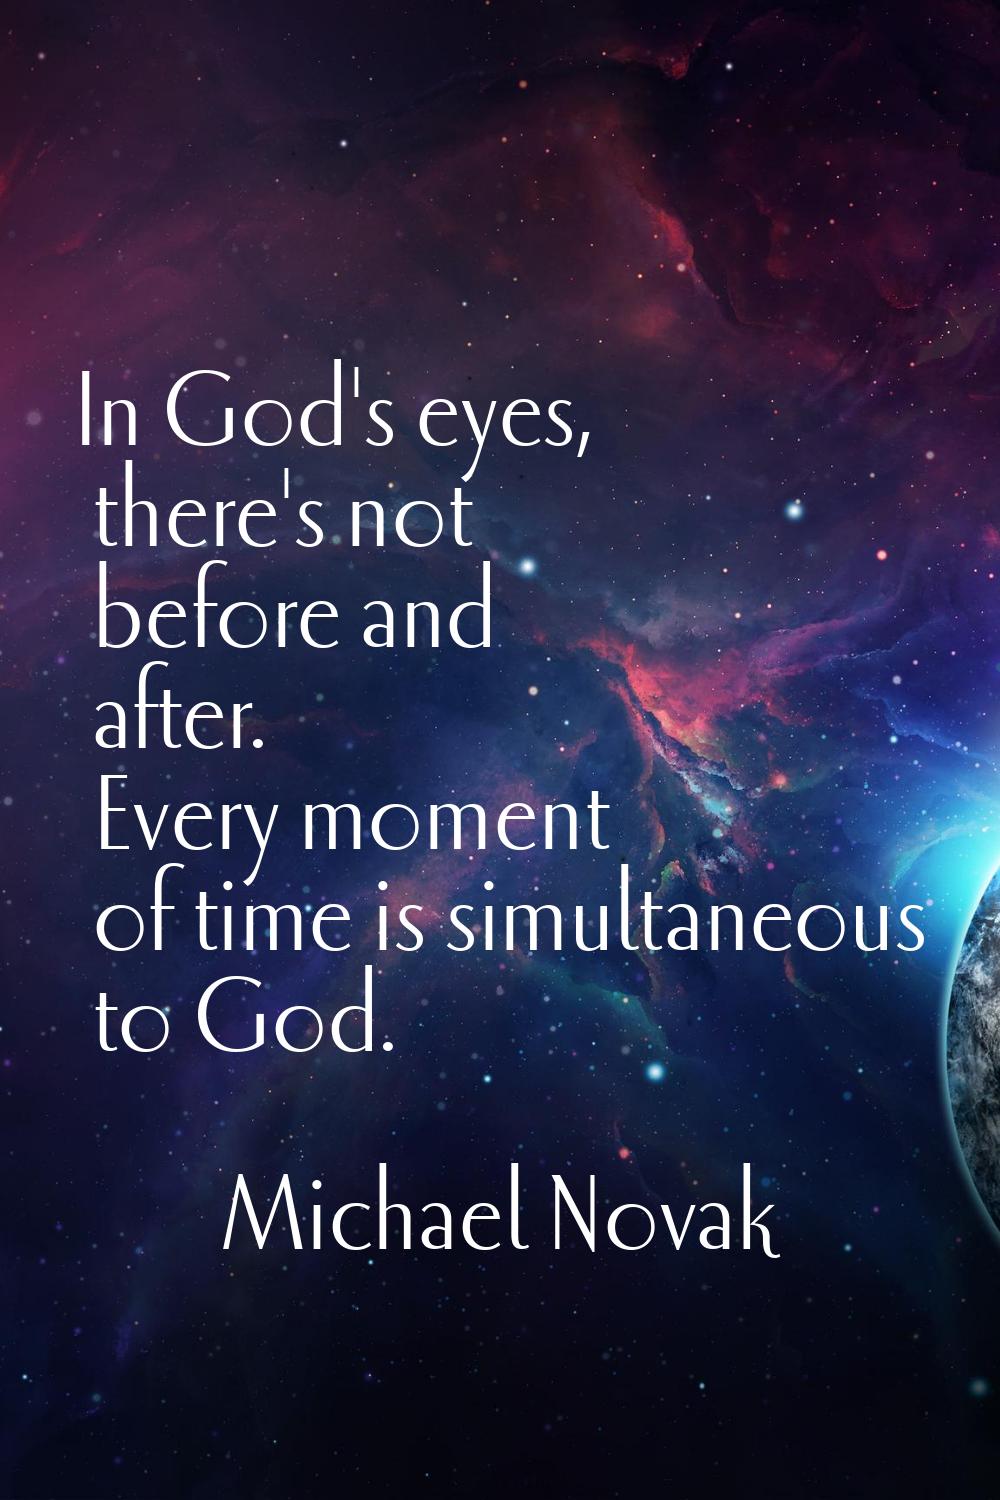 In God's eyes, there's not before and after. Every moment of time is simultaneous to God.